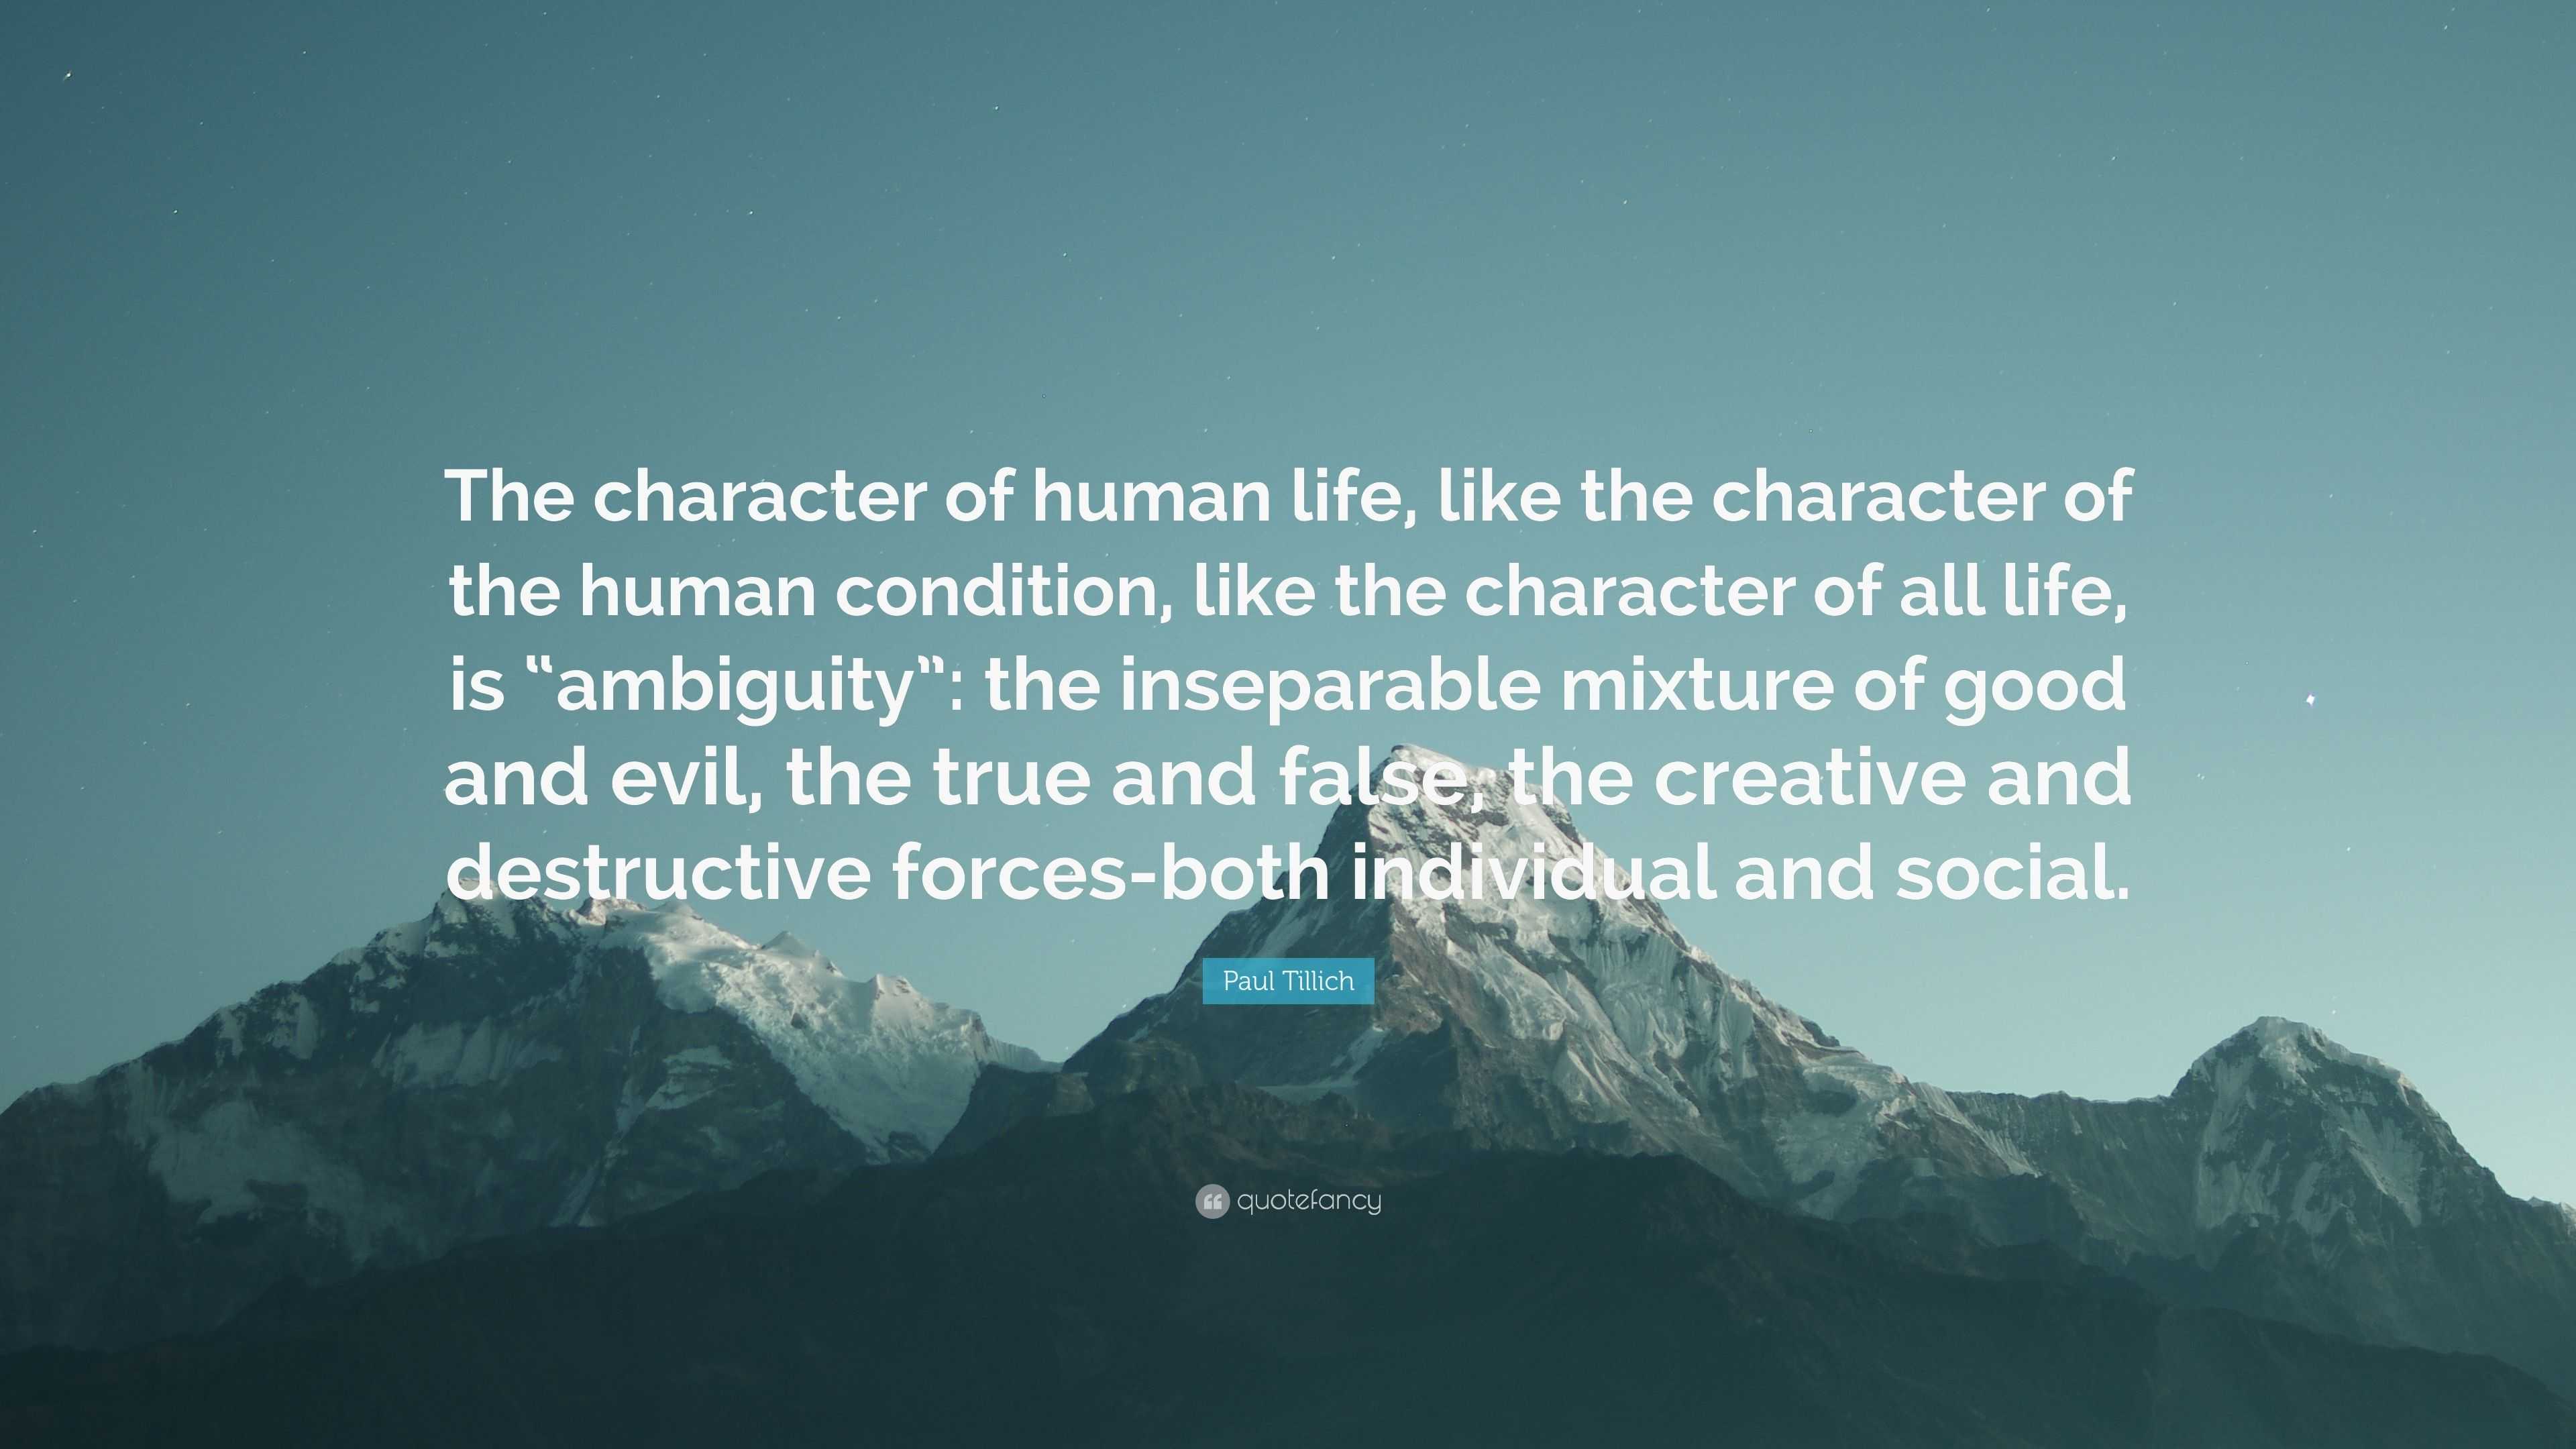 Paul Tillich Quote “The character of human life like the character of the